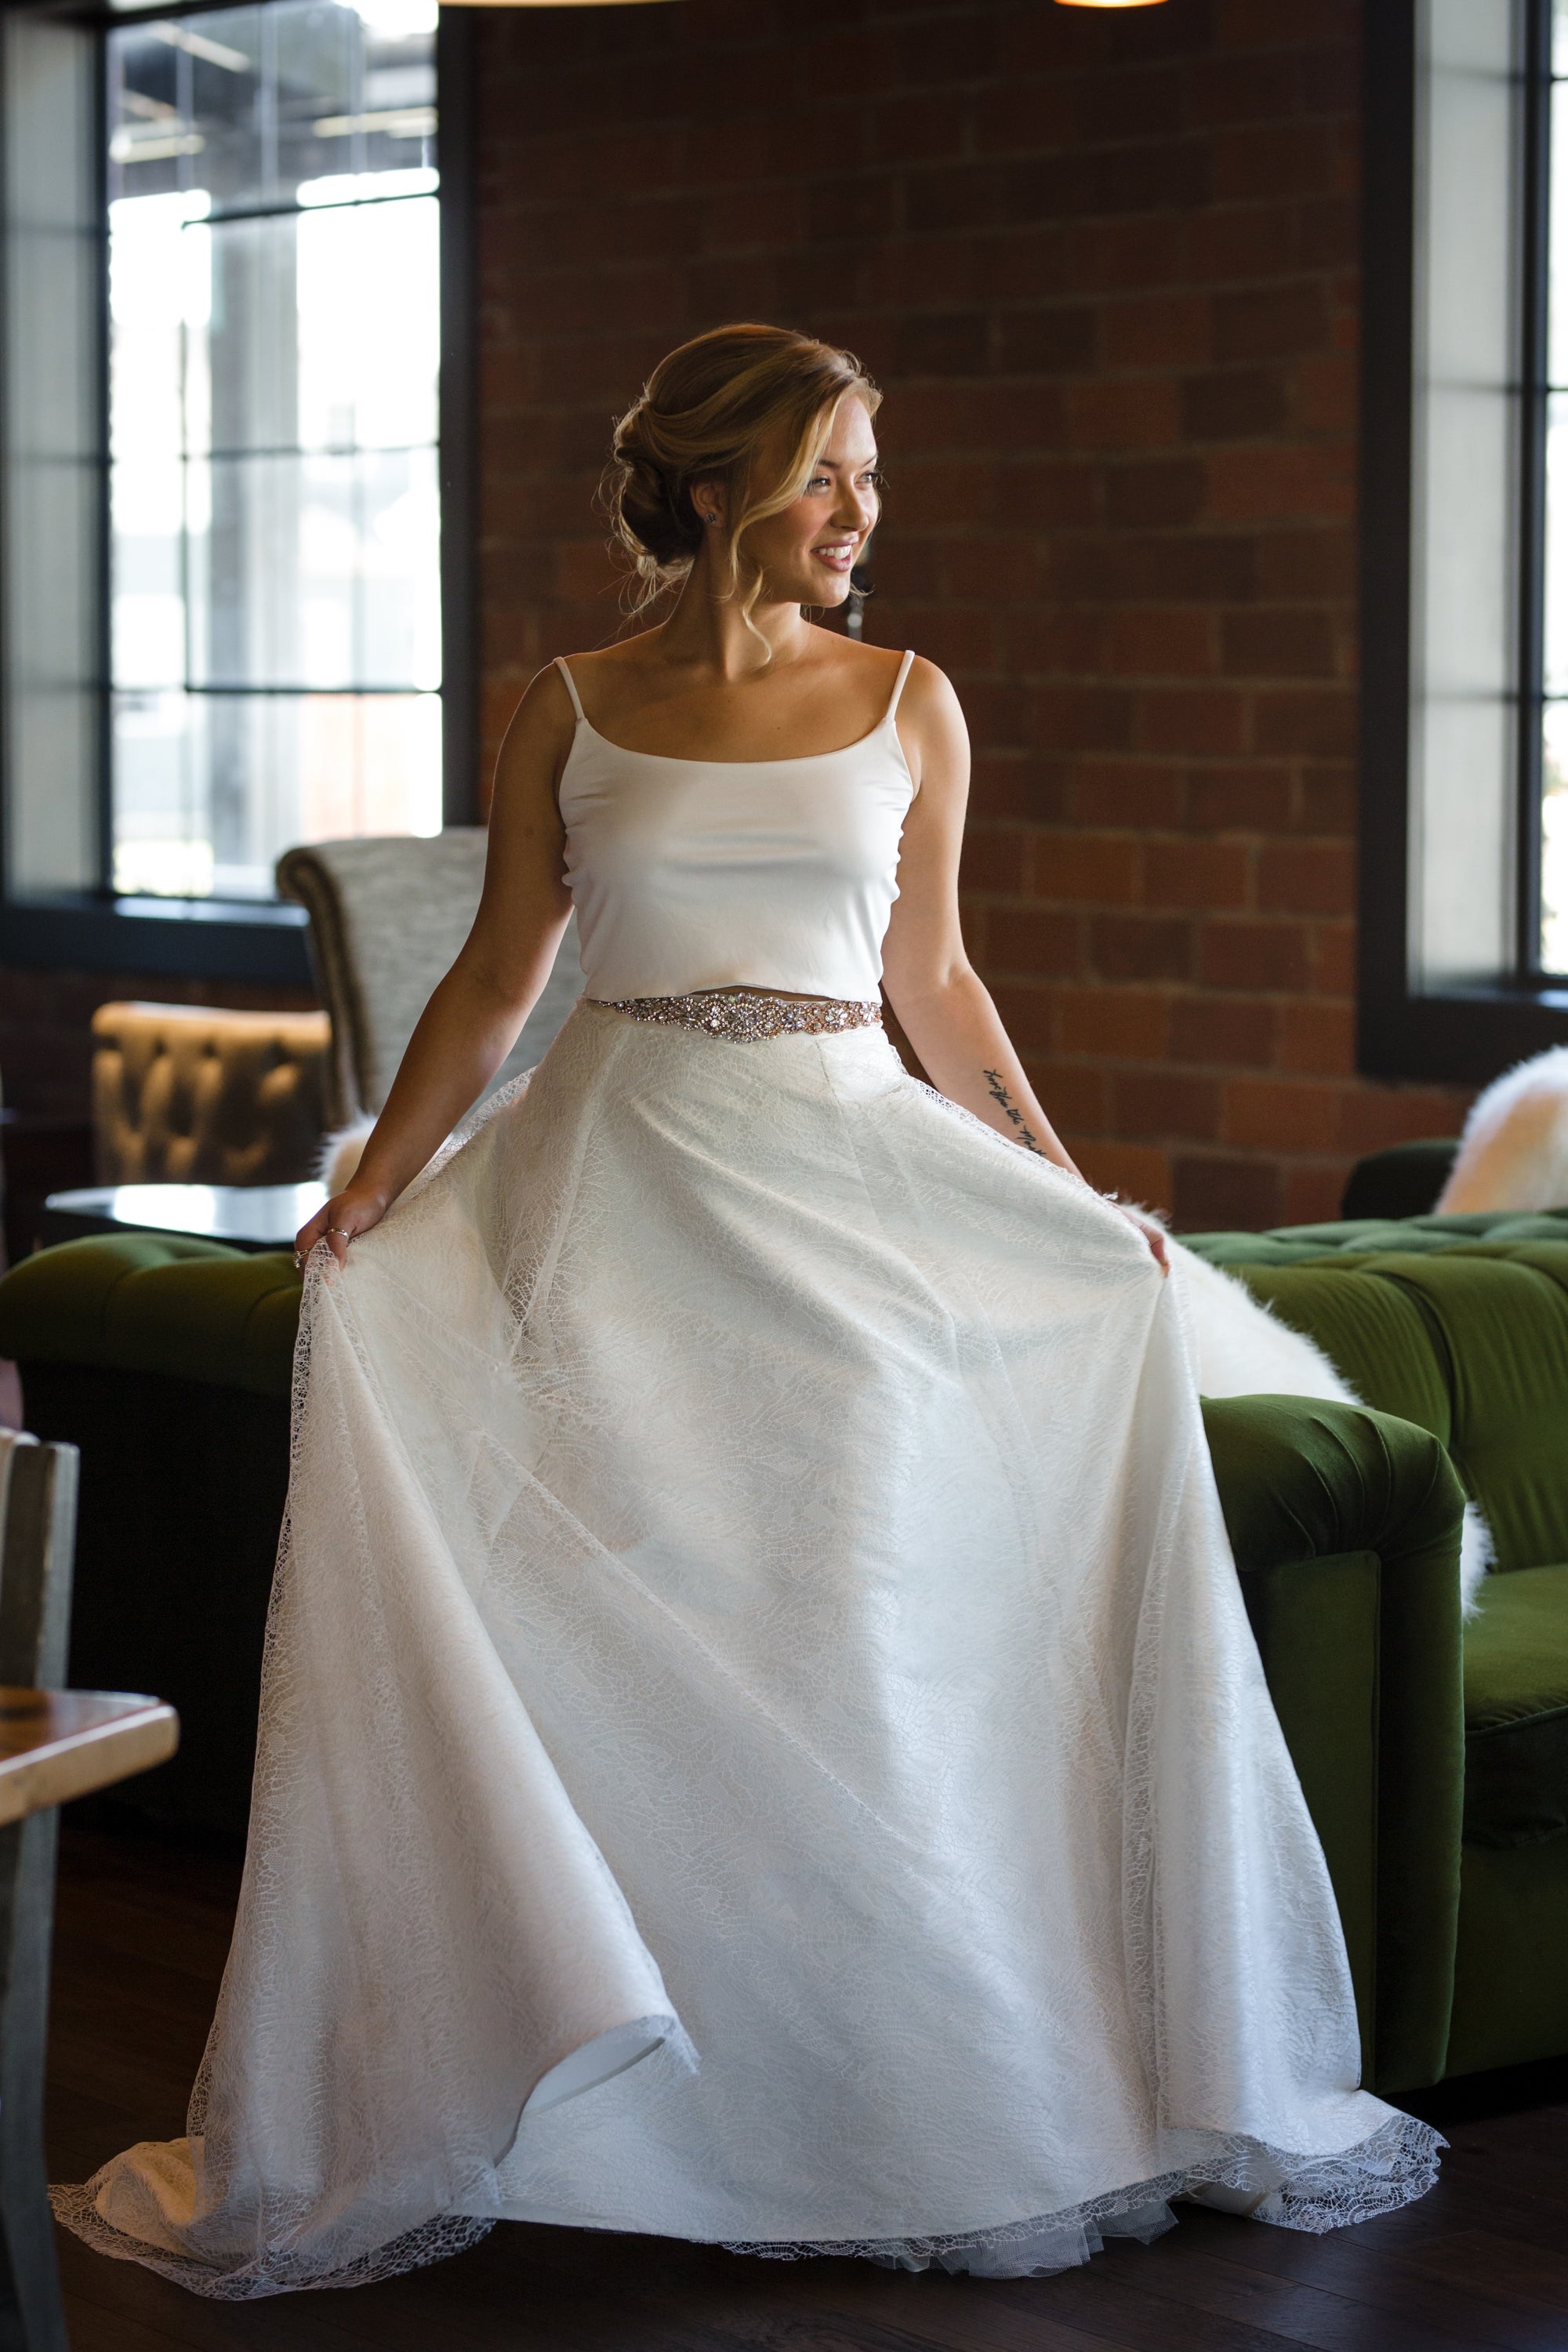 Wedding dress using ivory lace Jubilee on the skirt 3